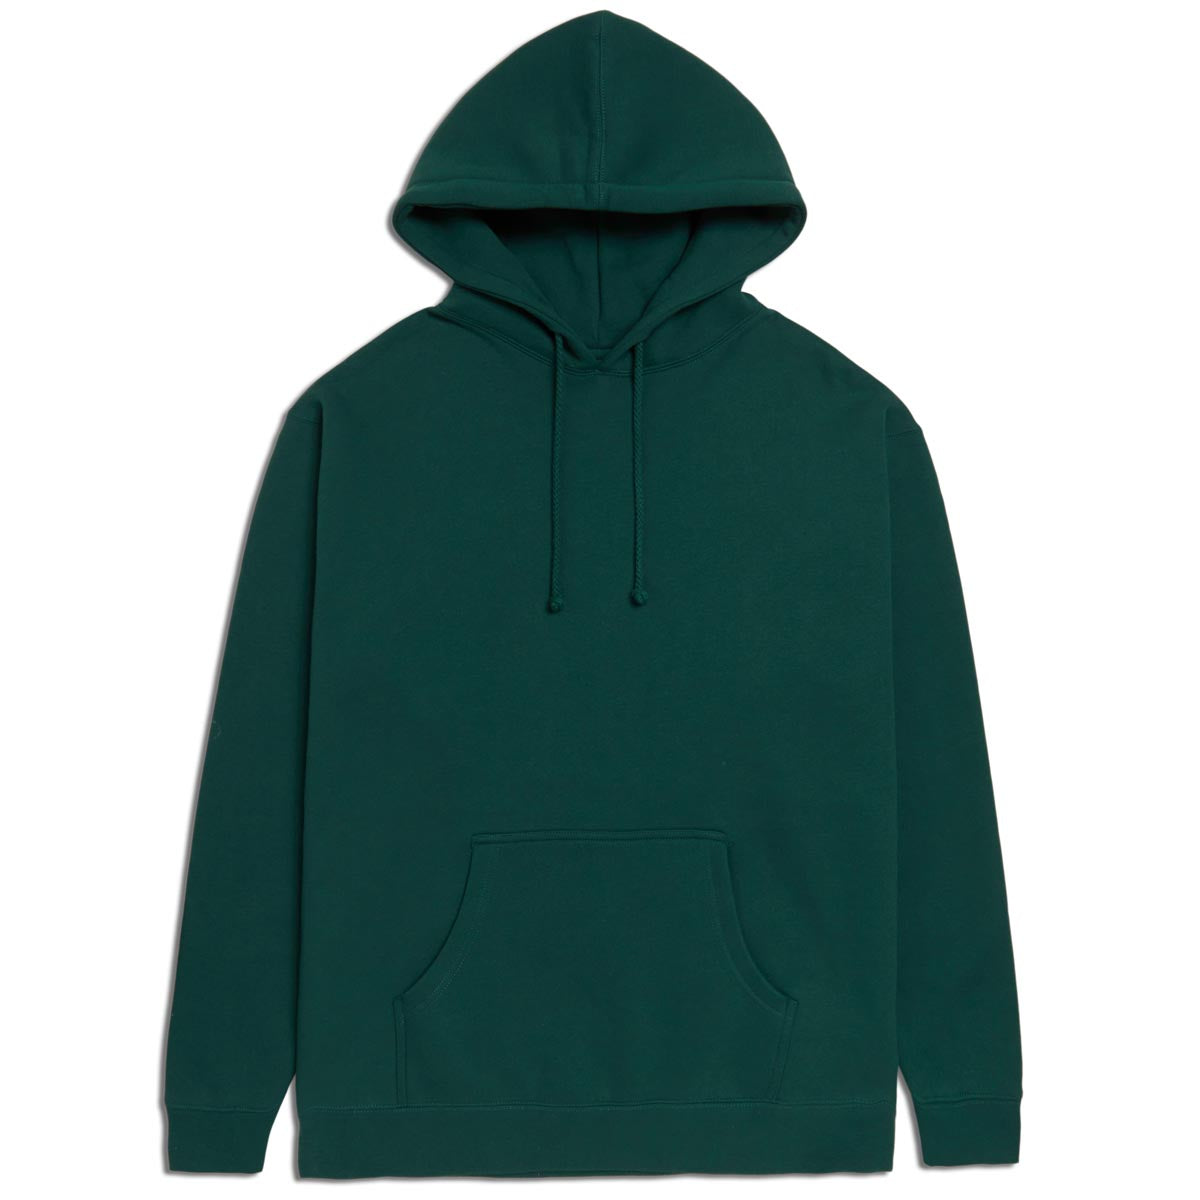 CCS Staple Pullover Hoodie - Green image 1